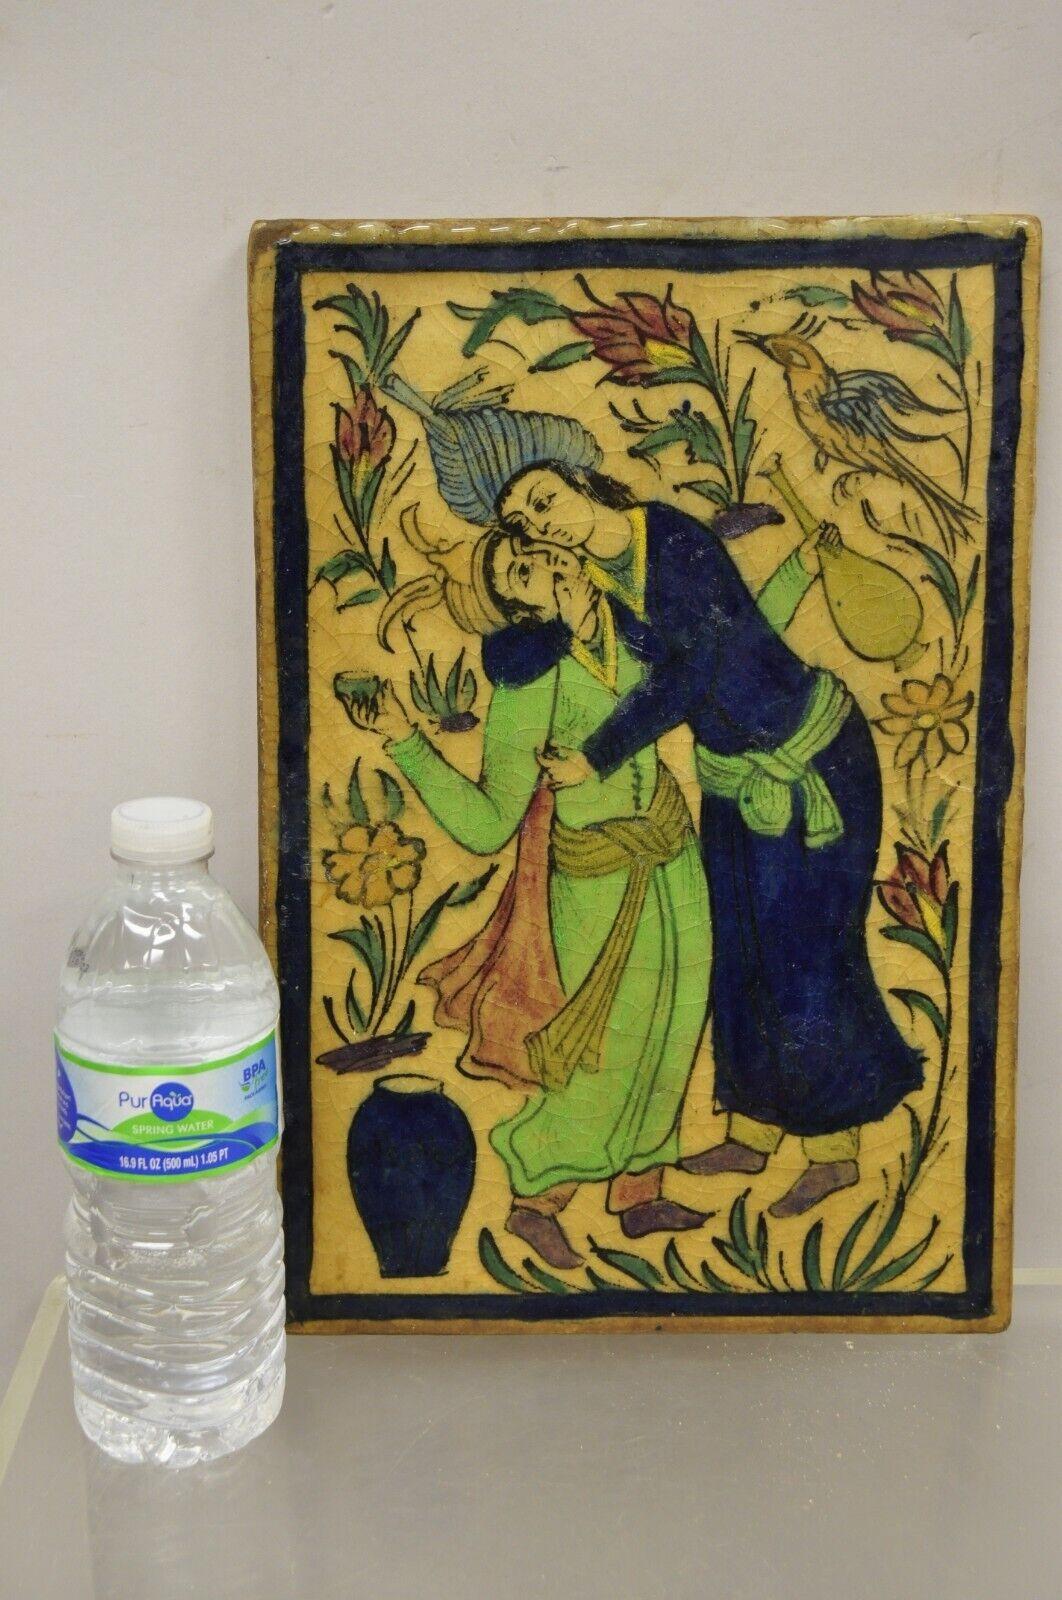 Antique Persian Iznik Qajar Style Ceramic Pottery Tile Blue and Green Man and Woman Kissing C2. Original crackle glazed finish, heavy ceramic pottery construction, very impressive detail, wonderful style and form. Great to mount as wall art or